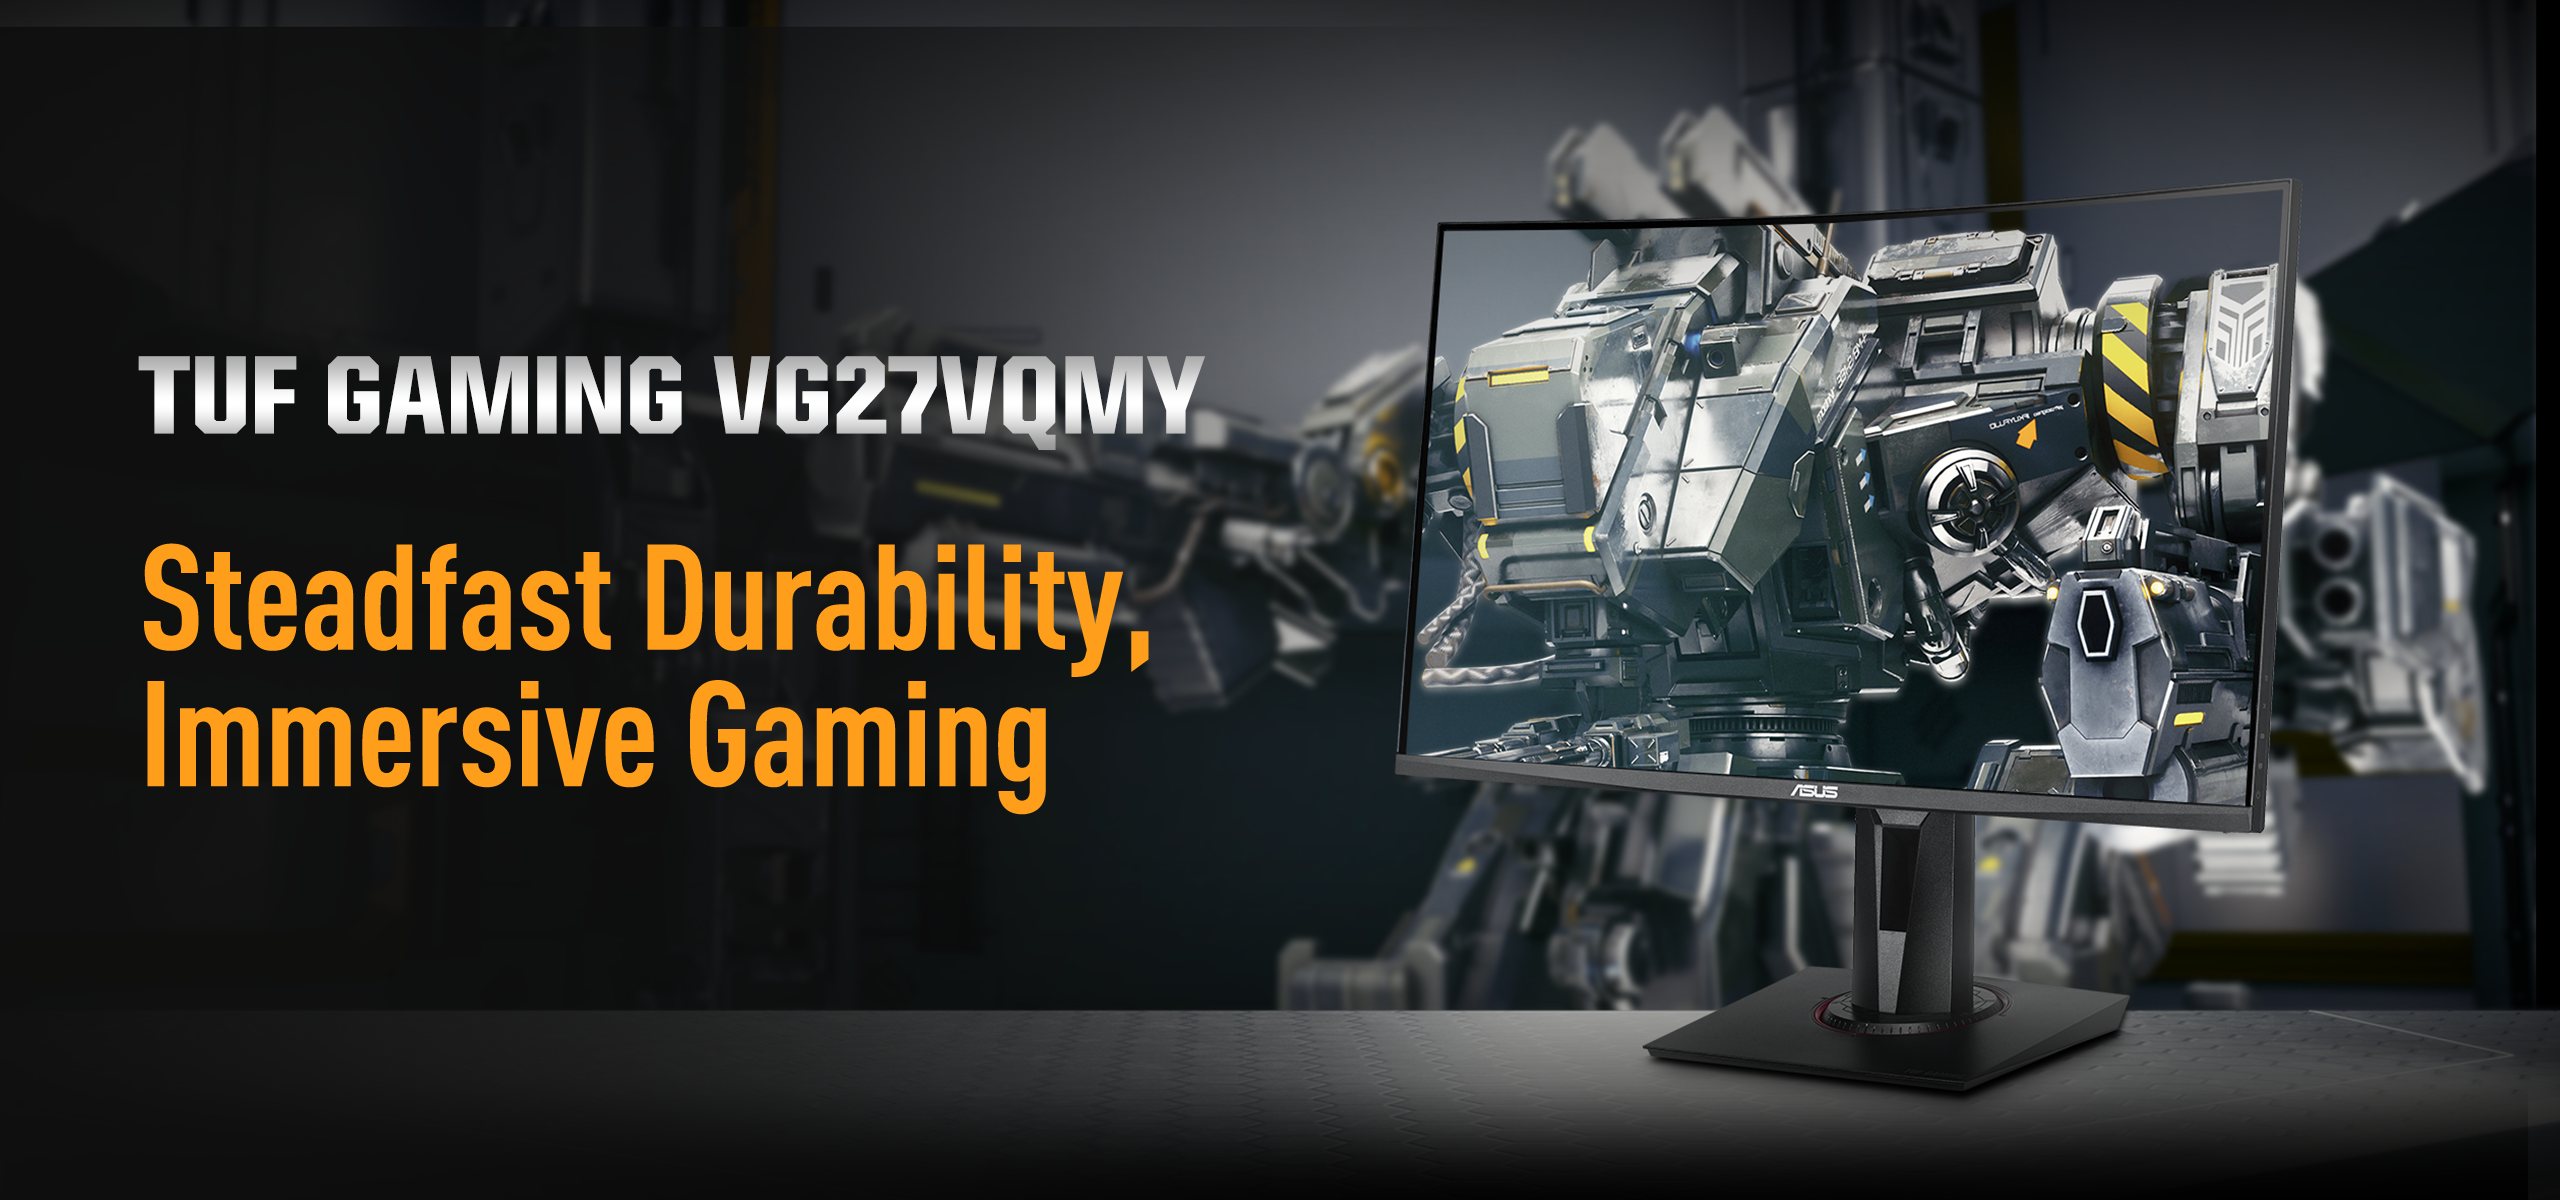 Key selling features of VG27VQMY